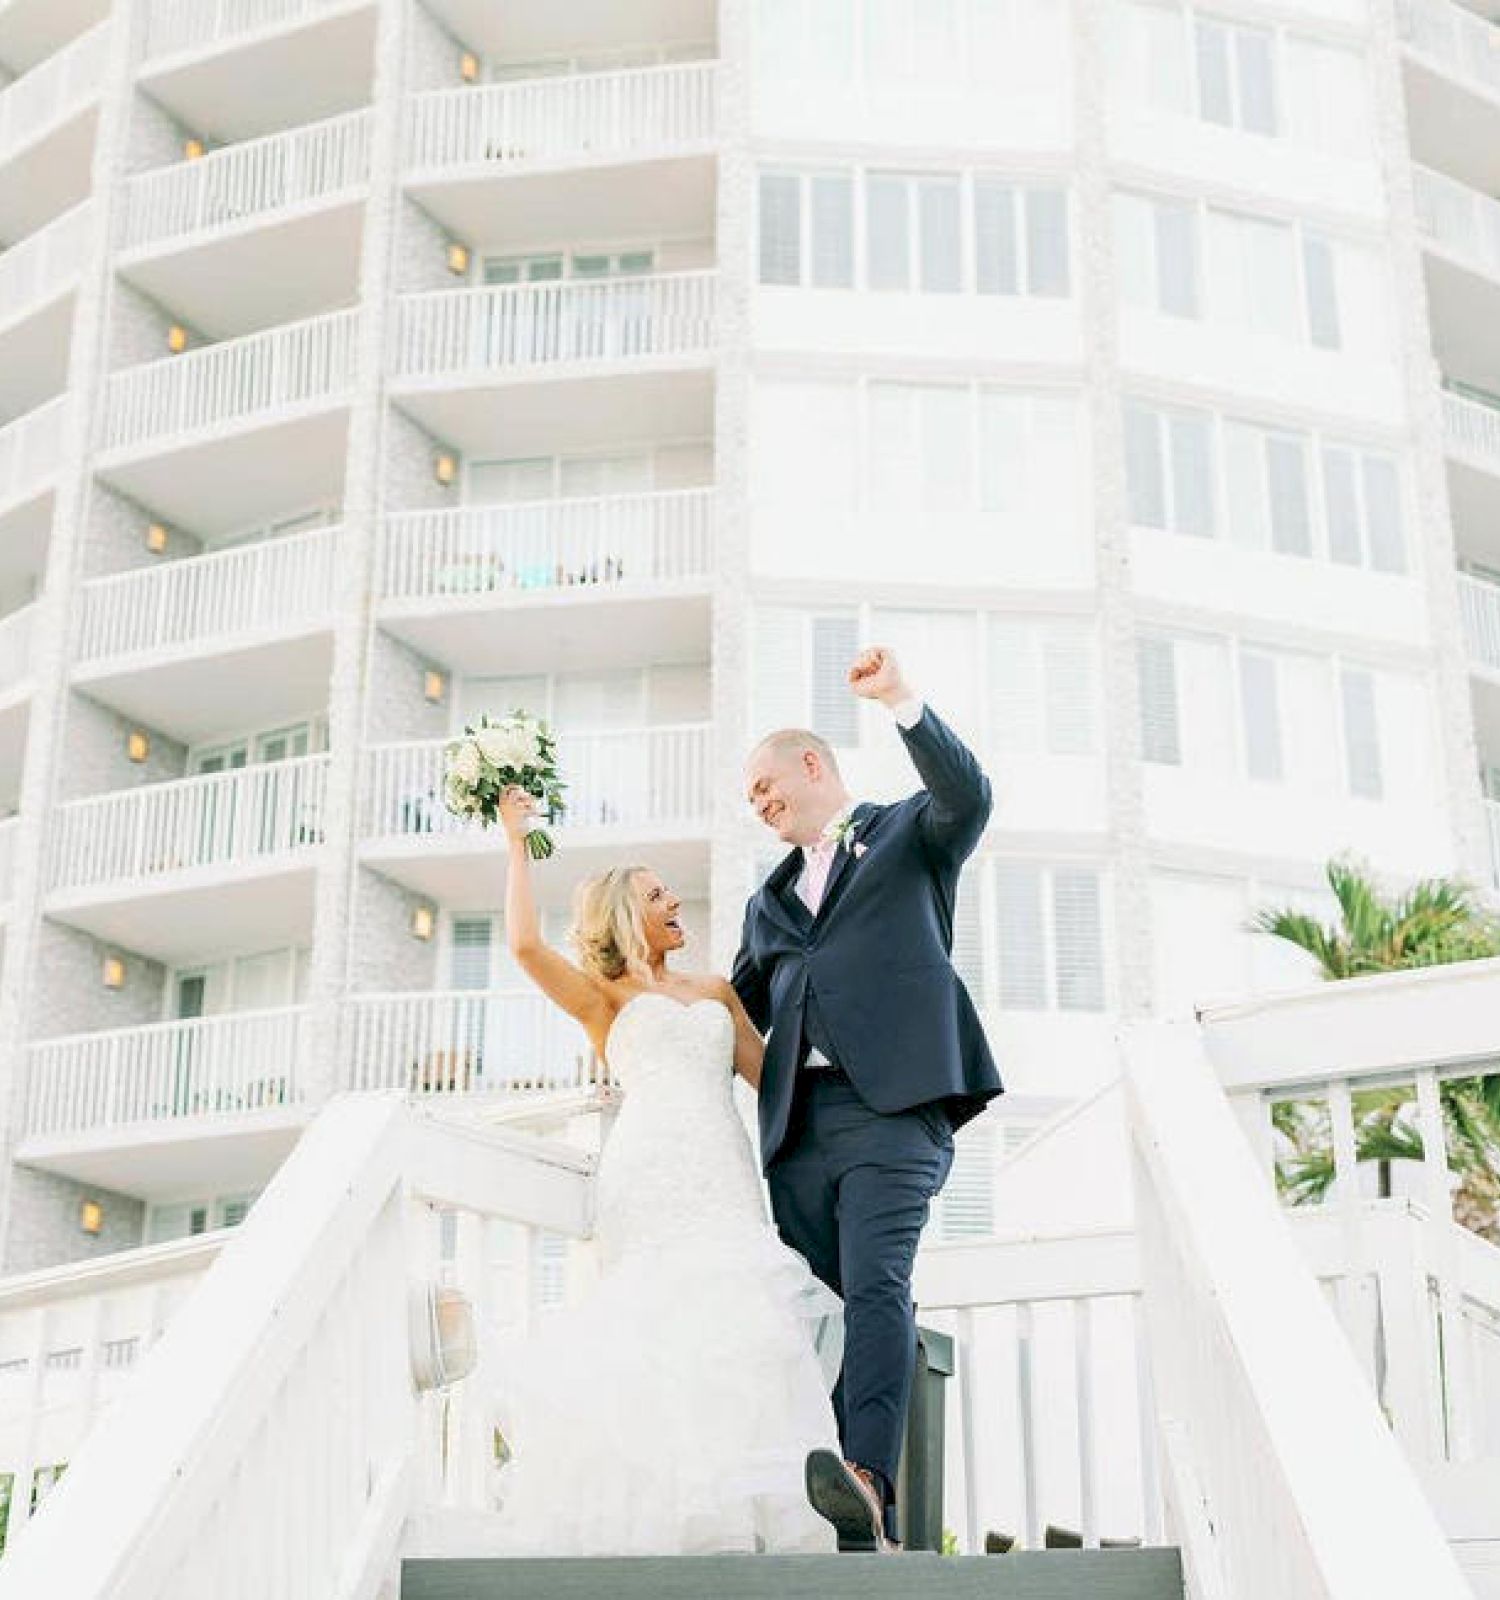 A couple in wedding attire celebrates on stairs with a building behind them.